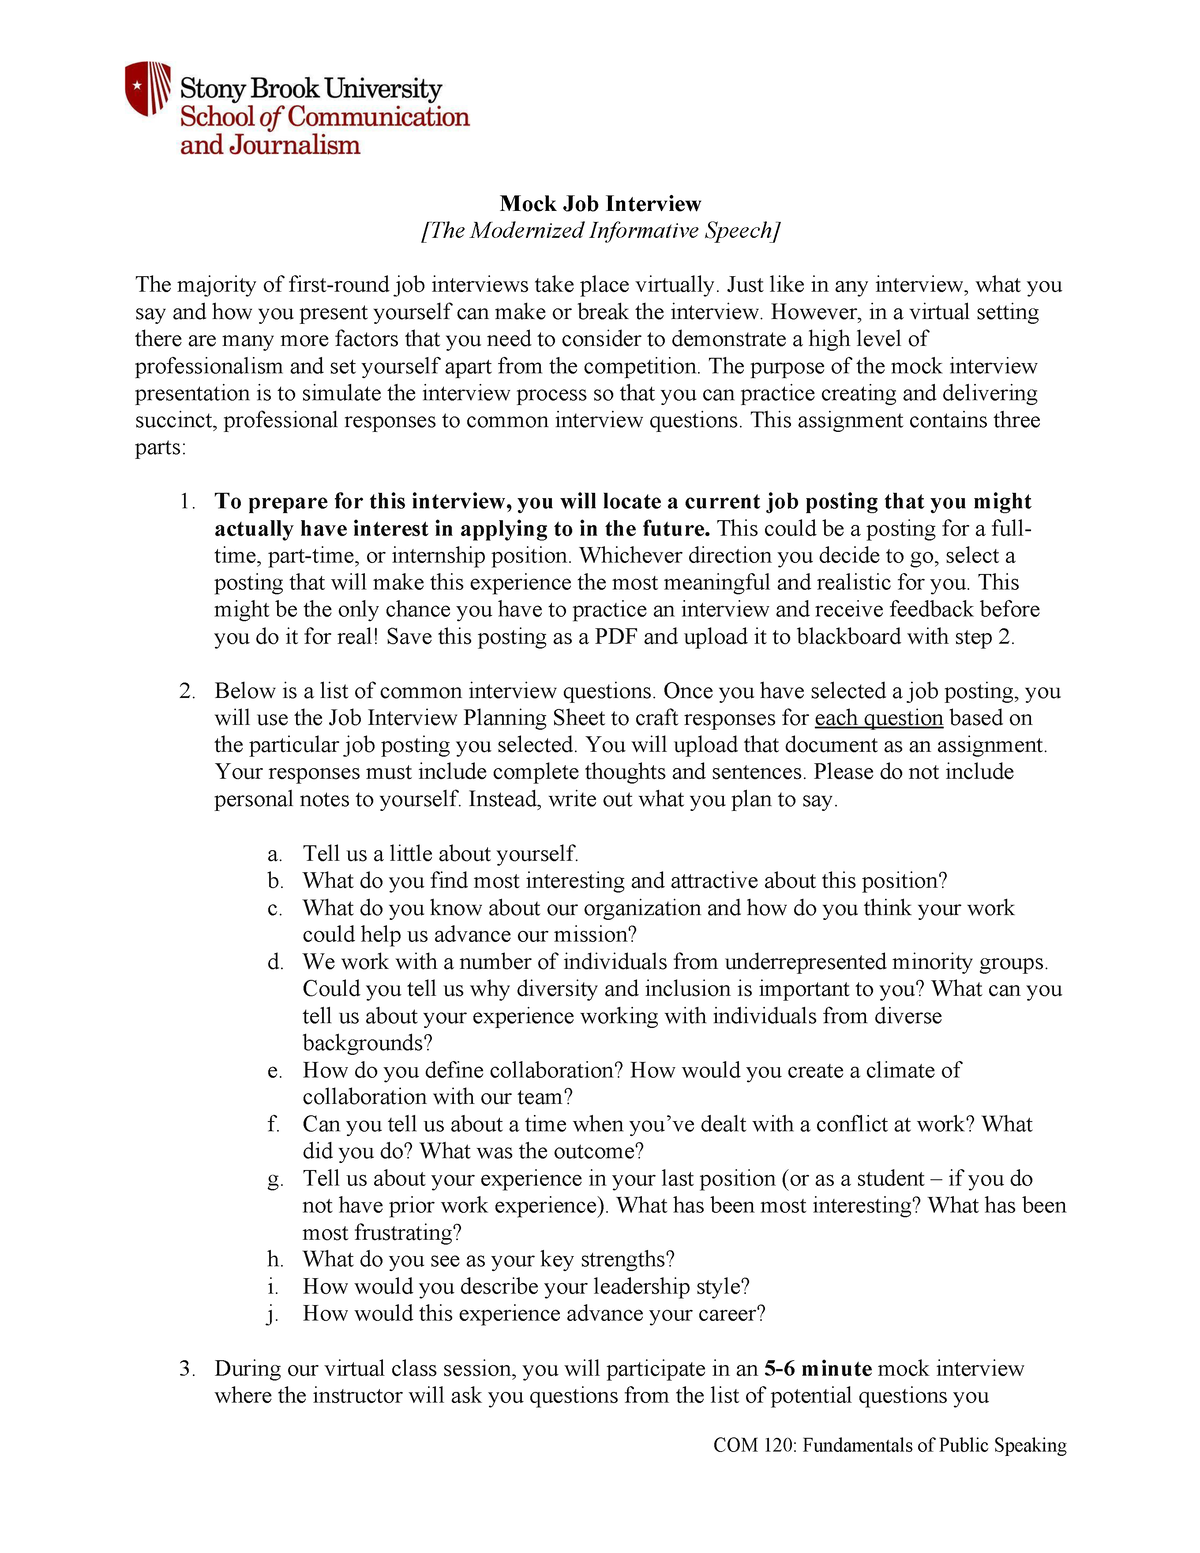 essay about mock job interview